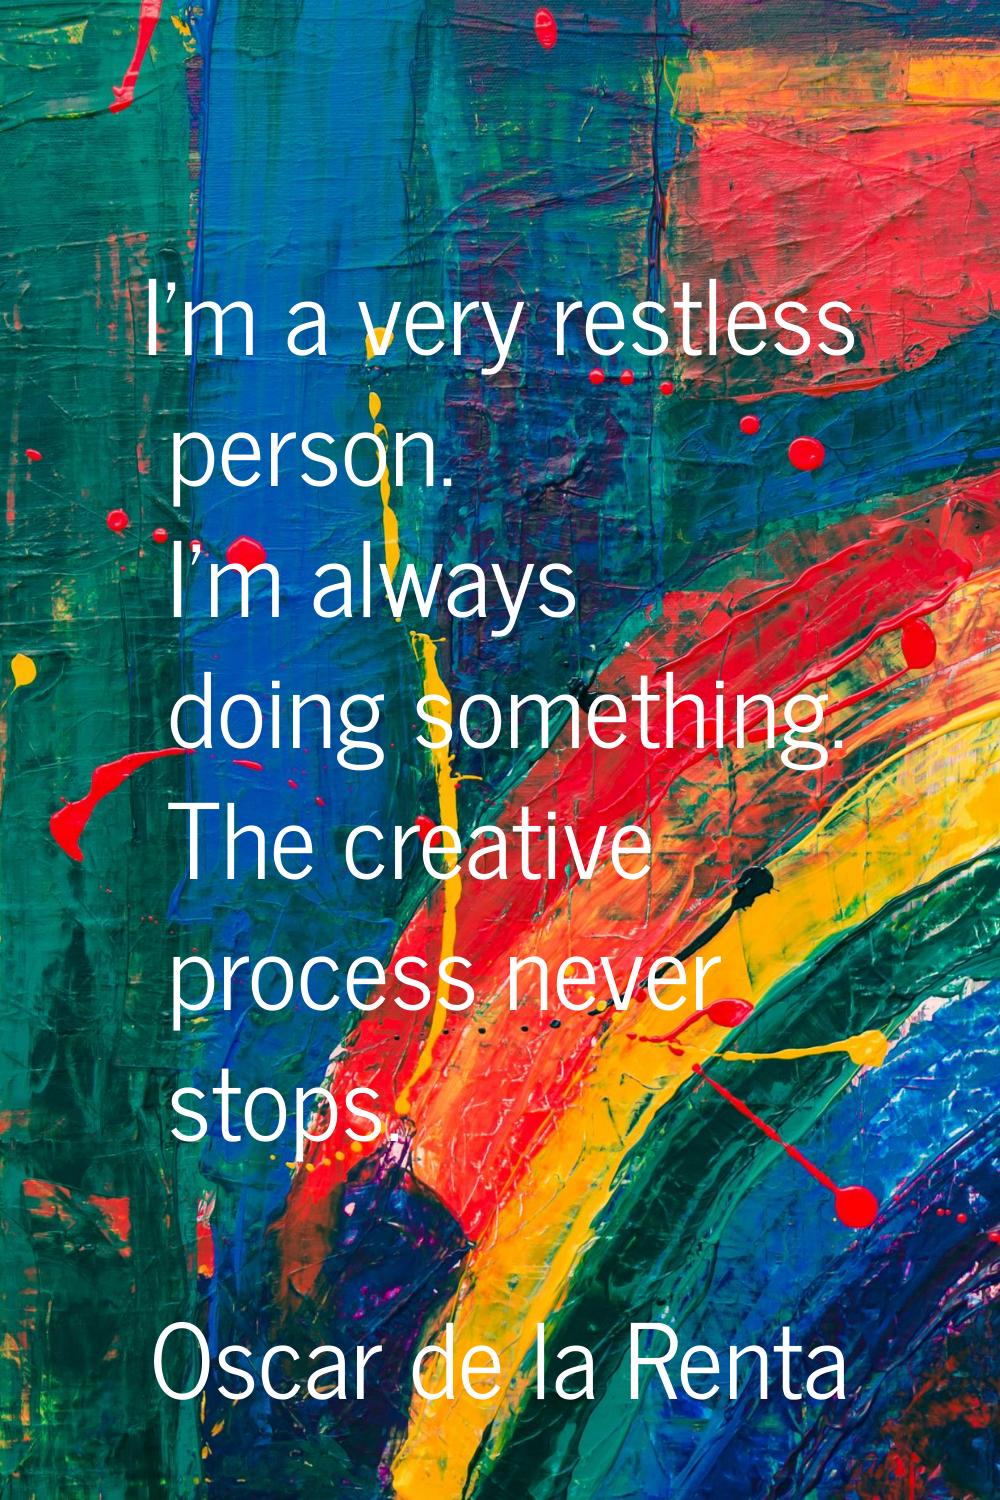 I'm a very restless person. I'm always doing something. The creative process never stops.